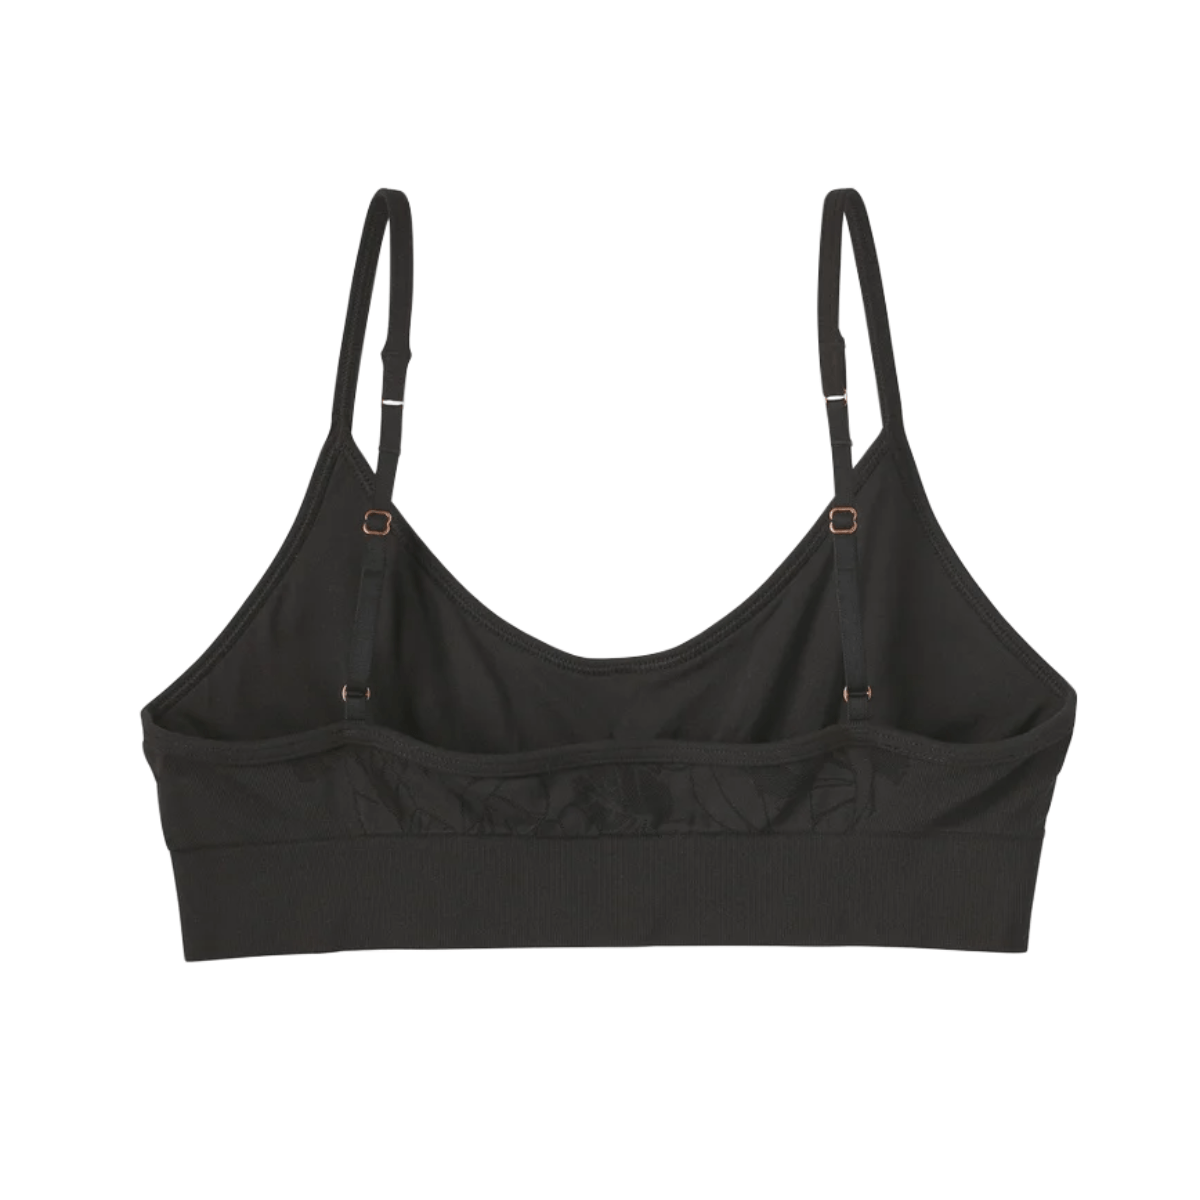 Patagonia Barely Everyday Bra - Women's - Al's Sporting Goods: Your  One-Stop Shop for Outdoor Sports Gear & Apparel